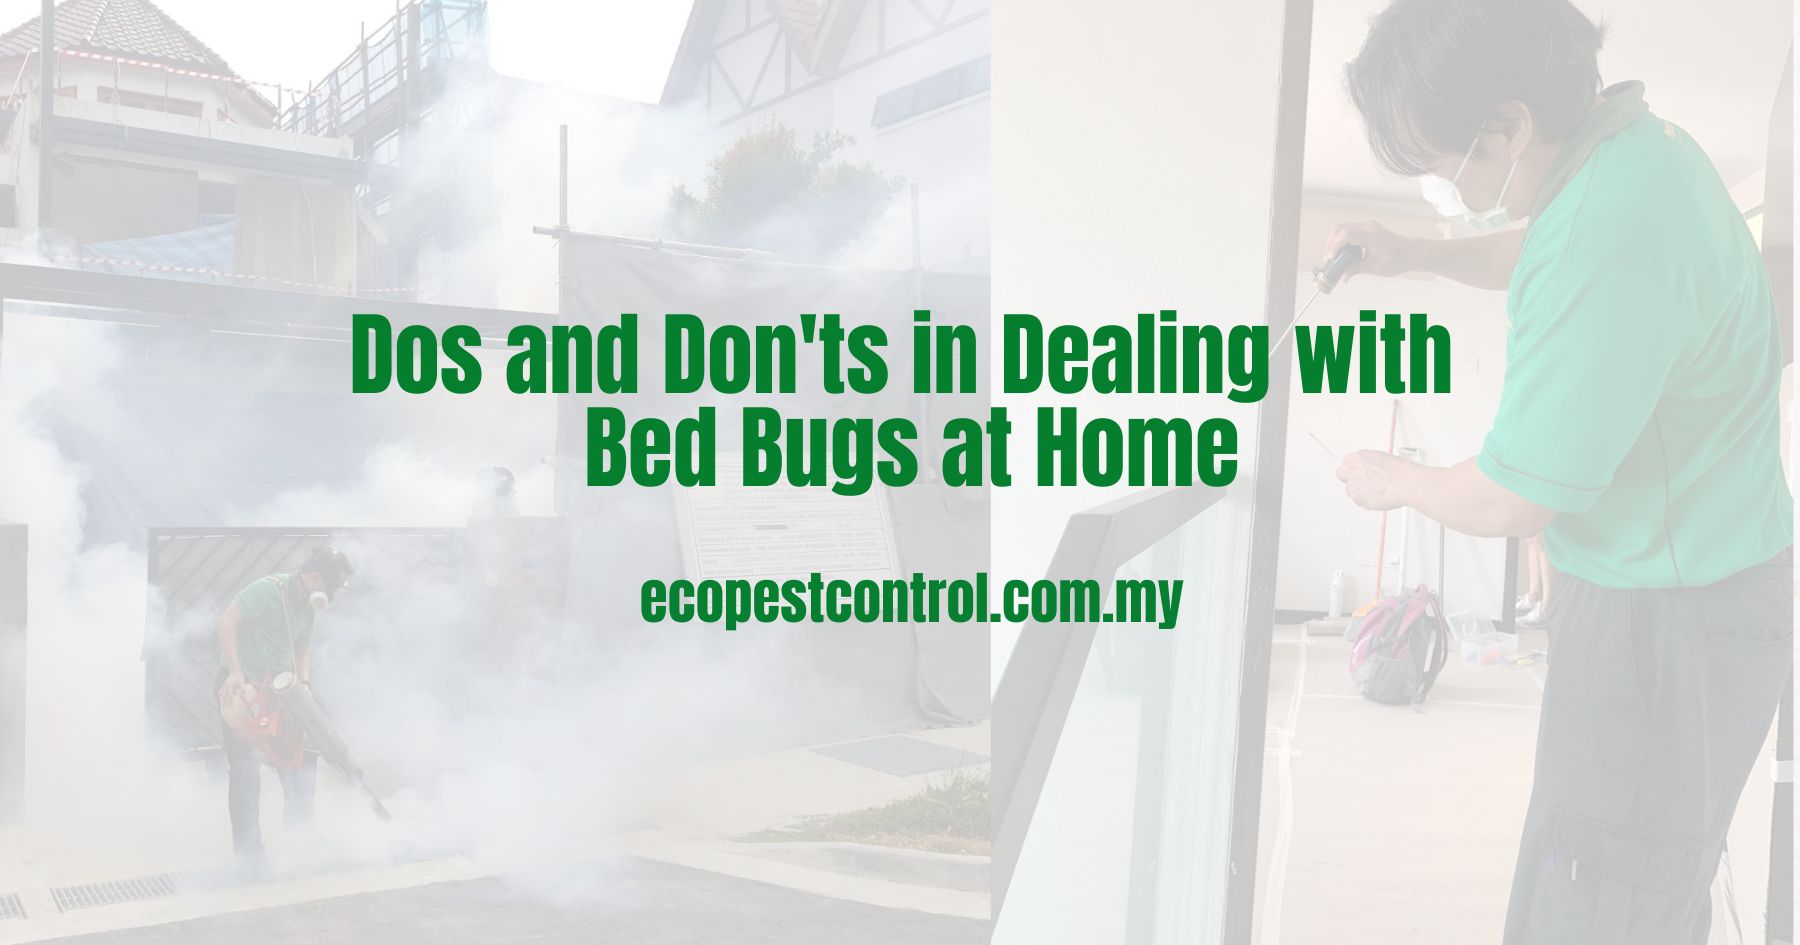 Dos and Don'ts in Dealing with Bed Bugs